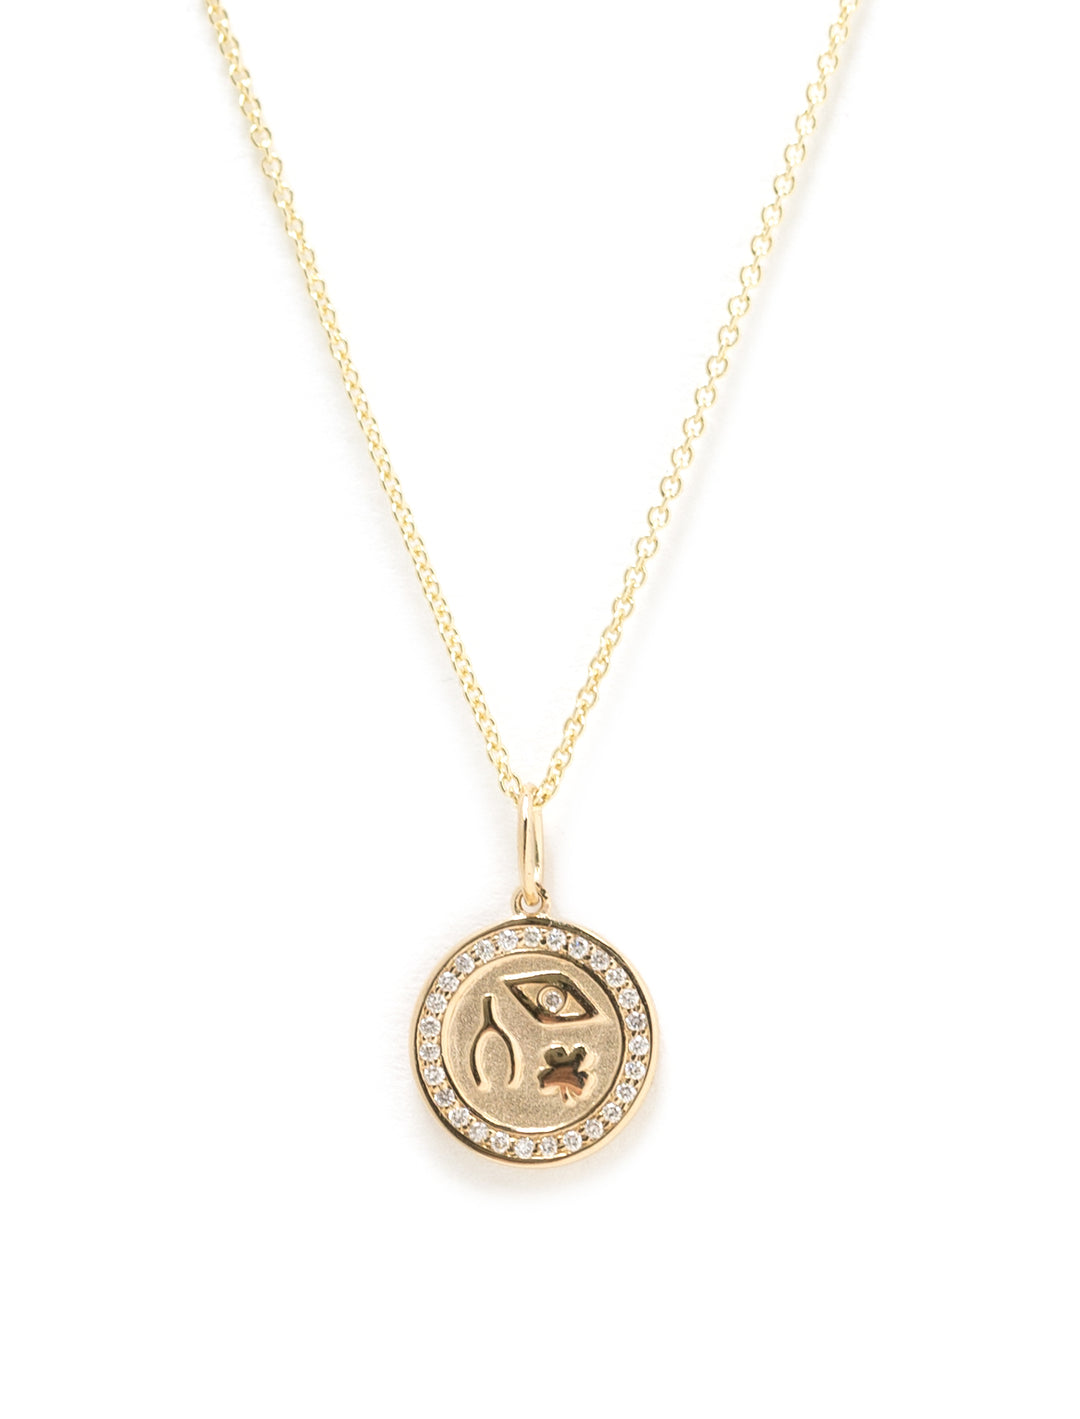 Front view of Sydney Evan's Luck and Protection Pave Border Medallion Necklace.